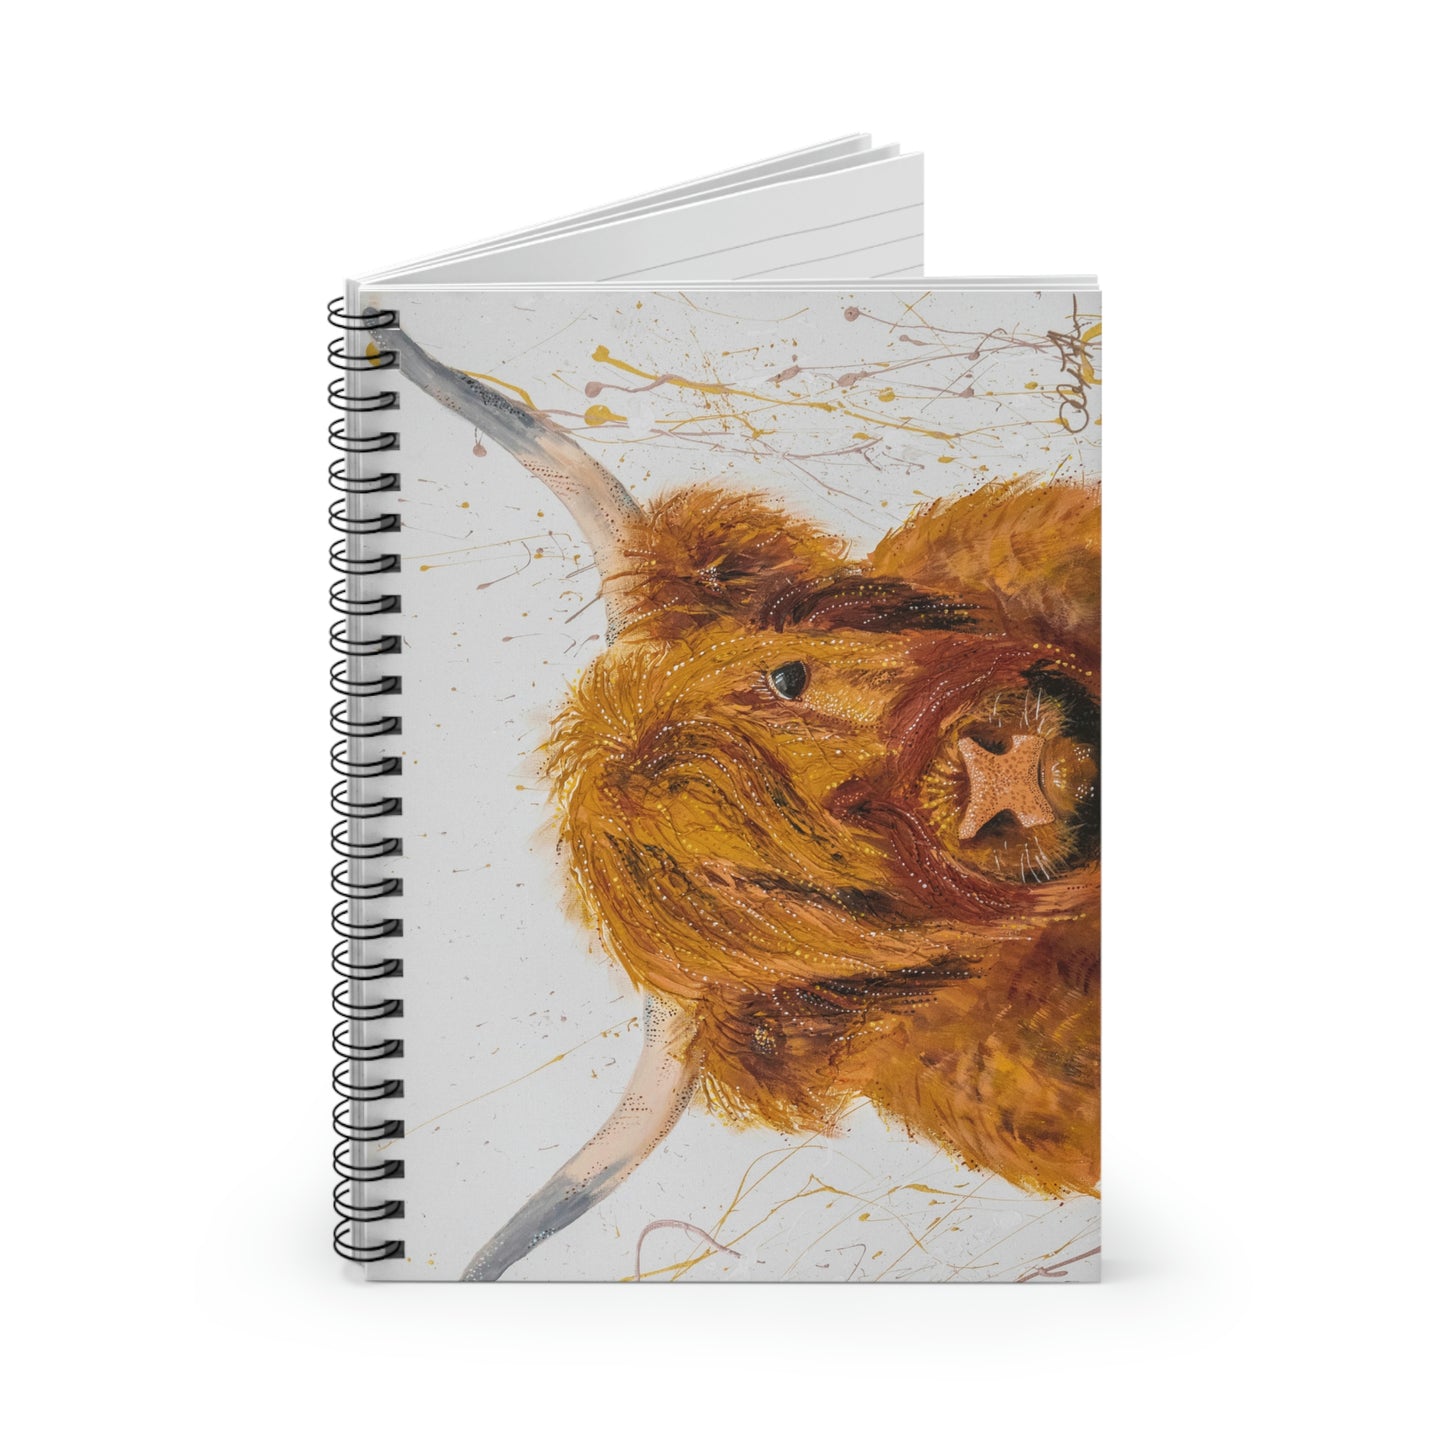 Cow Spiral Notebook - Ruled Line